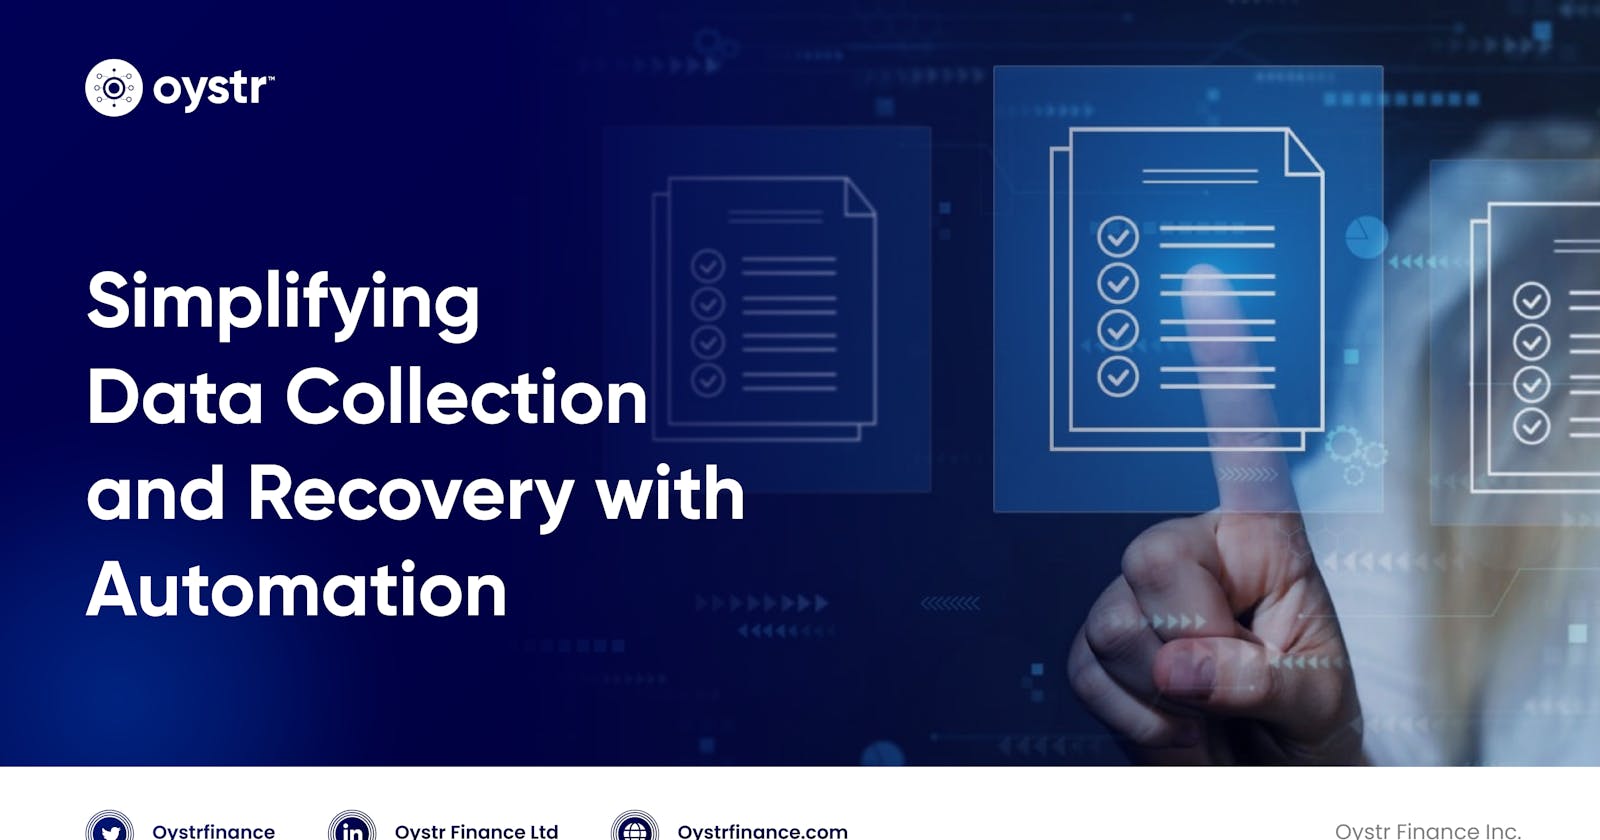 Simplifying Data Collection and Recovery with Automation